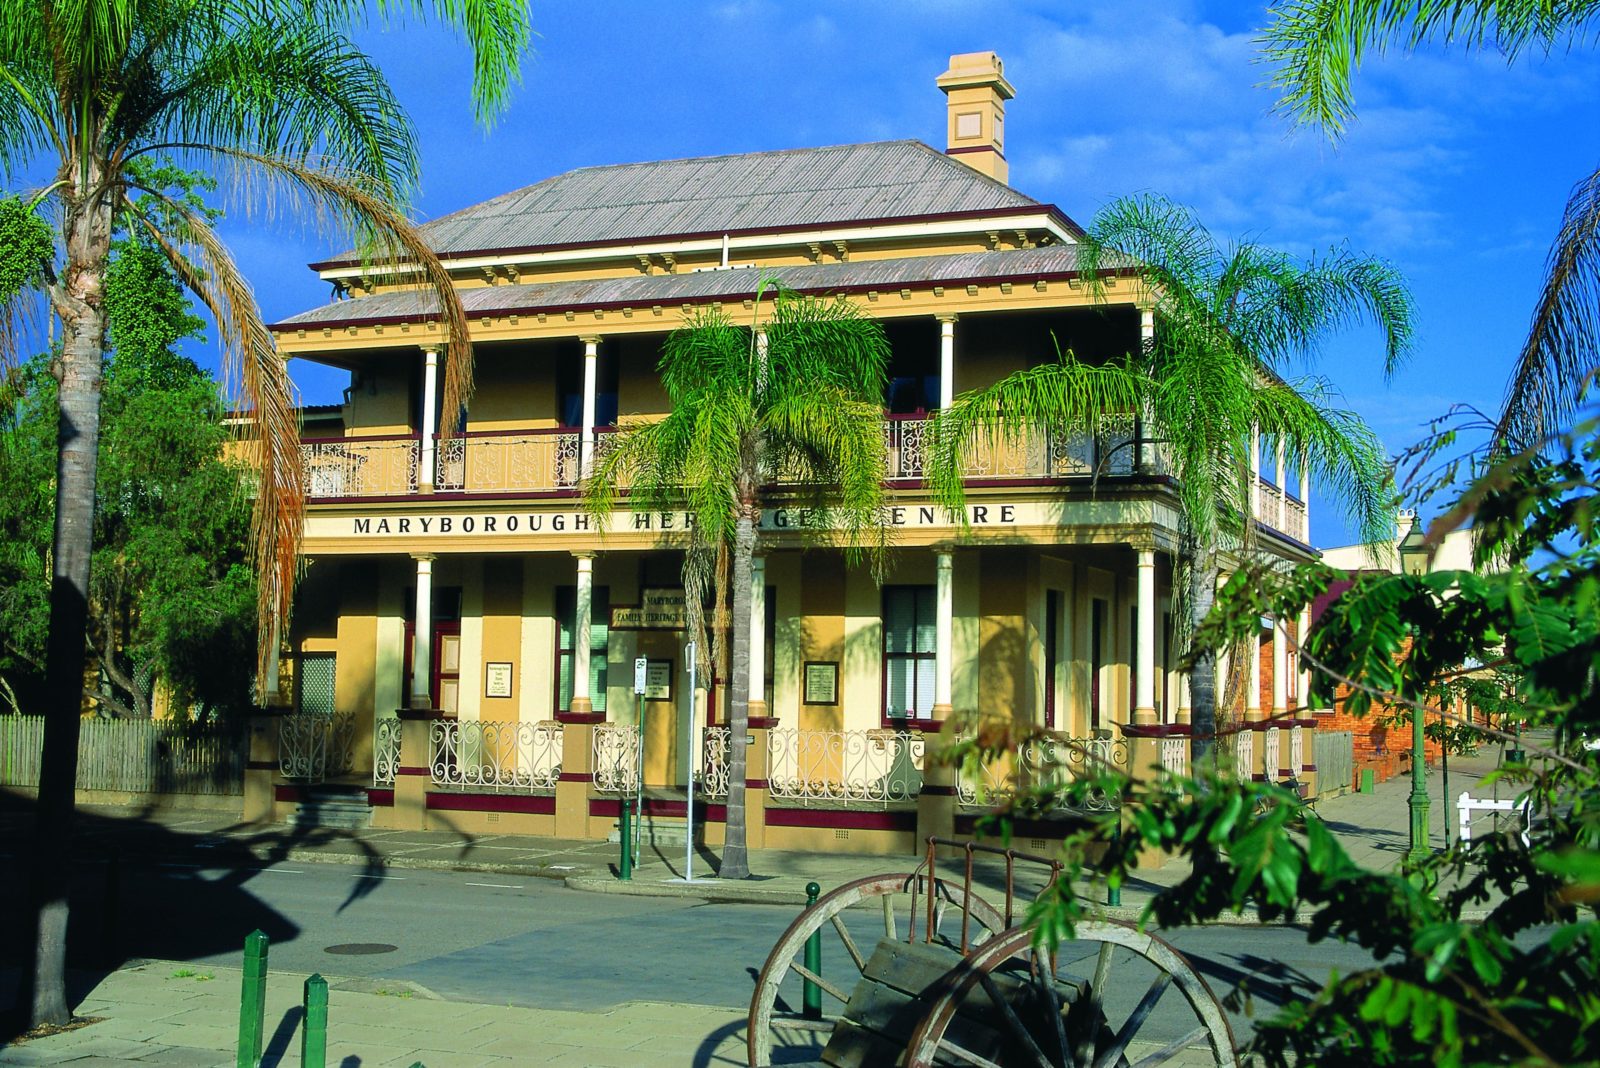 photo showing the Maryborough Family Heritage Institute two story colonial style building building